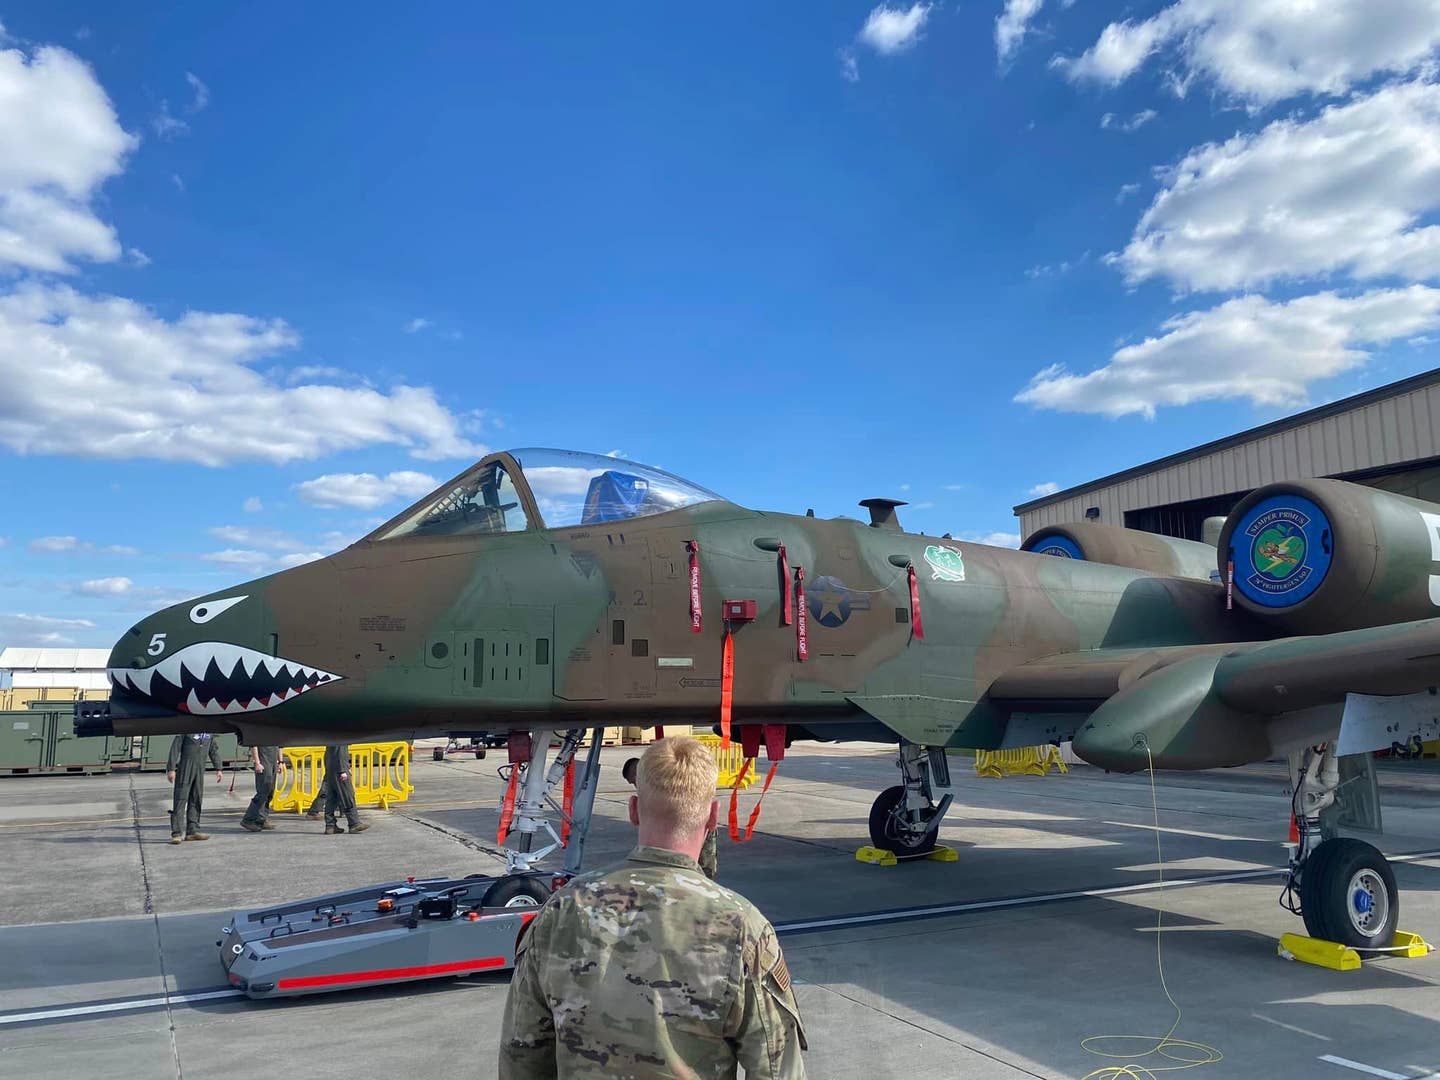 A side view of the newly painted A-10. The 'Adam and Eve' emblem can be seen towards the middle of the aircraft. <em>Photo credit: 23rd Wing Commander via Facebook</em>